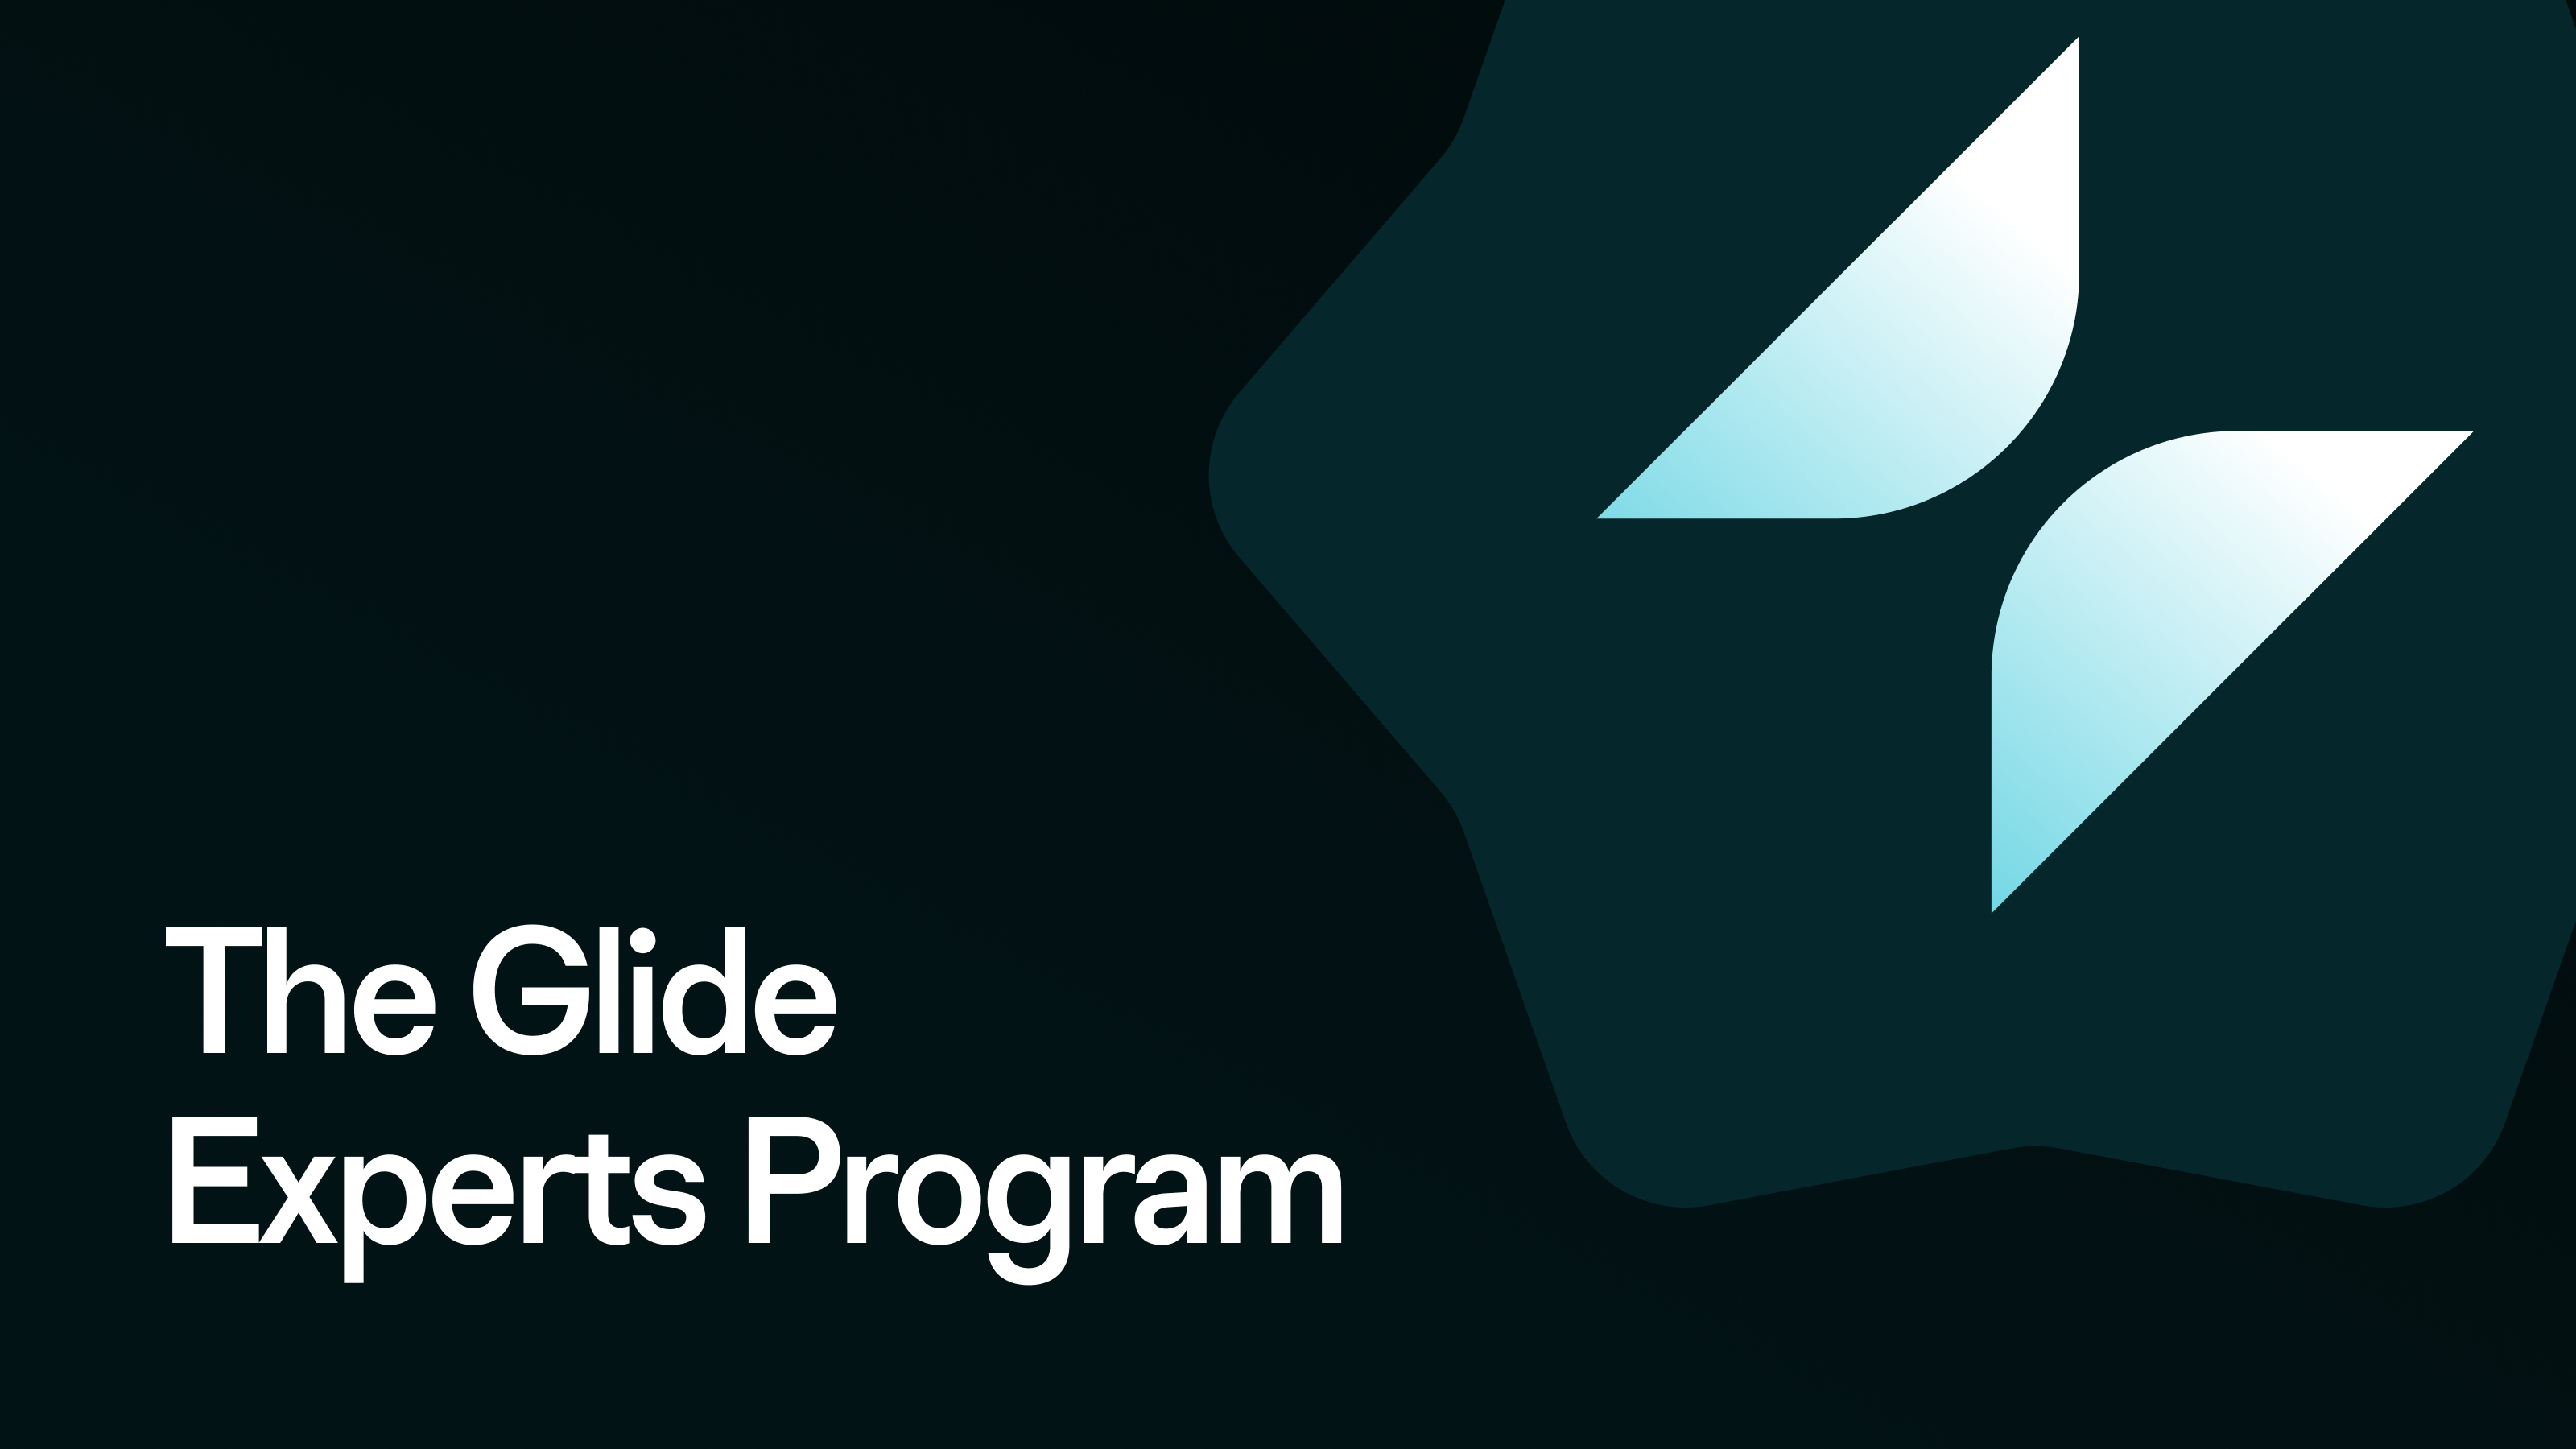 The Glide Experts Program: Create Custom Internal Software as a Service for your Clients